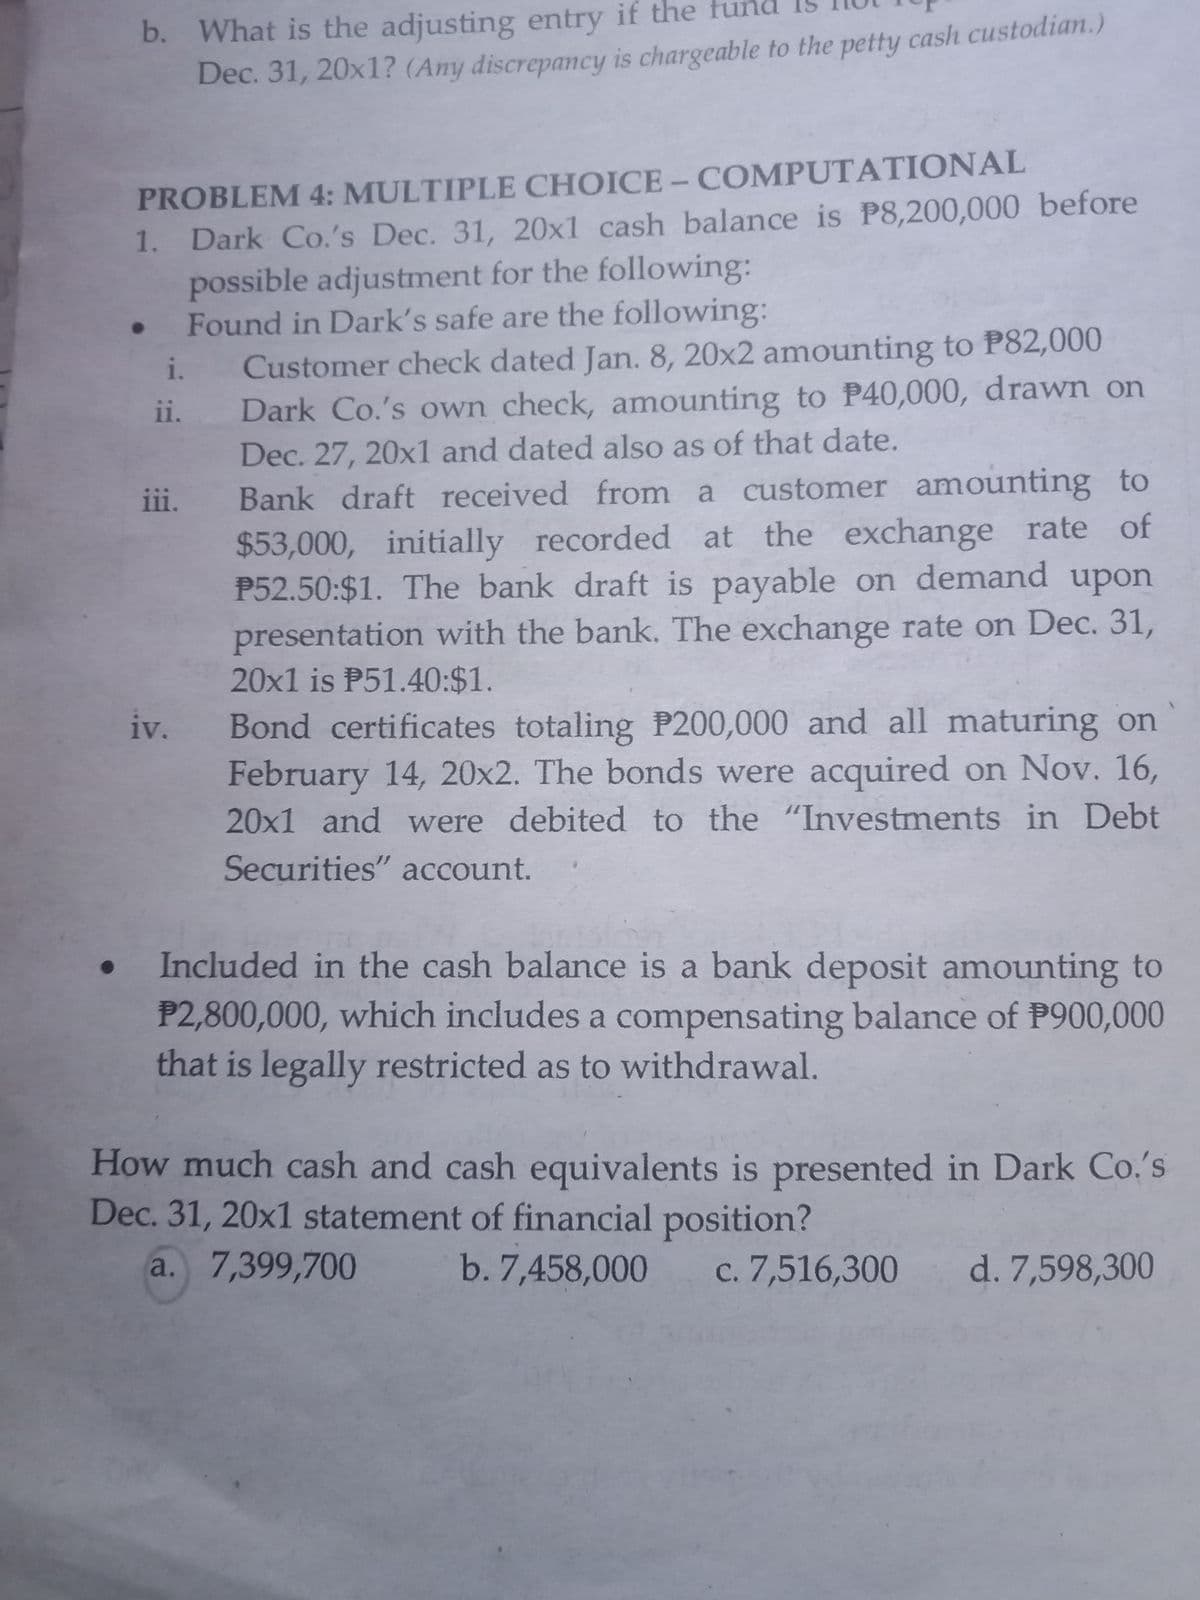 b. What is the adjusting entry if the fund I5
Dec. 31, 20x1? (Any discrepancy is chargeable to the petty cash custodian.)
PROBLEM 4: MULTIPLE CHOICE - COMPUTATIONAL
1. Dark Co.'s Dec. 31, 20x1 cash balance is P8,200,000 before
possible adjustment for the following:
• Found in Dark's safe are the following:
Customer check dated Jan. 8, 20x2 amounting to P82,000
Dark Co.'s own check, amounting to P40,000, drawn on
Dec. 27, 20x1 and dated also as of that date.
Bank draft received from a customer amounting to
$53,000, initially recorded at the exchange rate of
P52.50:$1. The bank draft is payable on demand upon
presentation with the bank. The exchange rate on Dec. 31,
20x1 is P51.40:$1.
i.
ii.
iii.
Bond certificates totaling P200,000 and all maturing on
February 14, 20x2. The bonds were acquired on Nov. 16,
20x1 and were debited to the "Investments in Debt
iv.
Securities" account.
Included in the cash balance is a bank deposit amounting to
P2,800,000, which includes a compensating balance of P900,000
that is legally restricted as to withdrawal.
How much cash and cash equivalents is presented in Dark Co.'s
Dec. 31, 20x1 statement of financial position?
a. 7,399,700
b. 7,458,000 c. 7,516,300
d. 7,598,300
